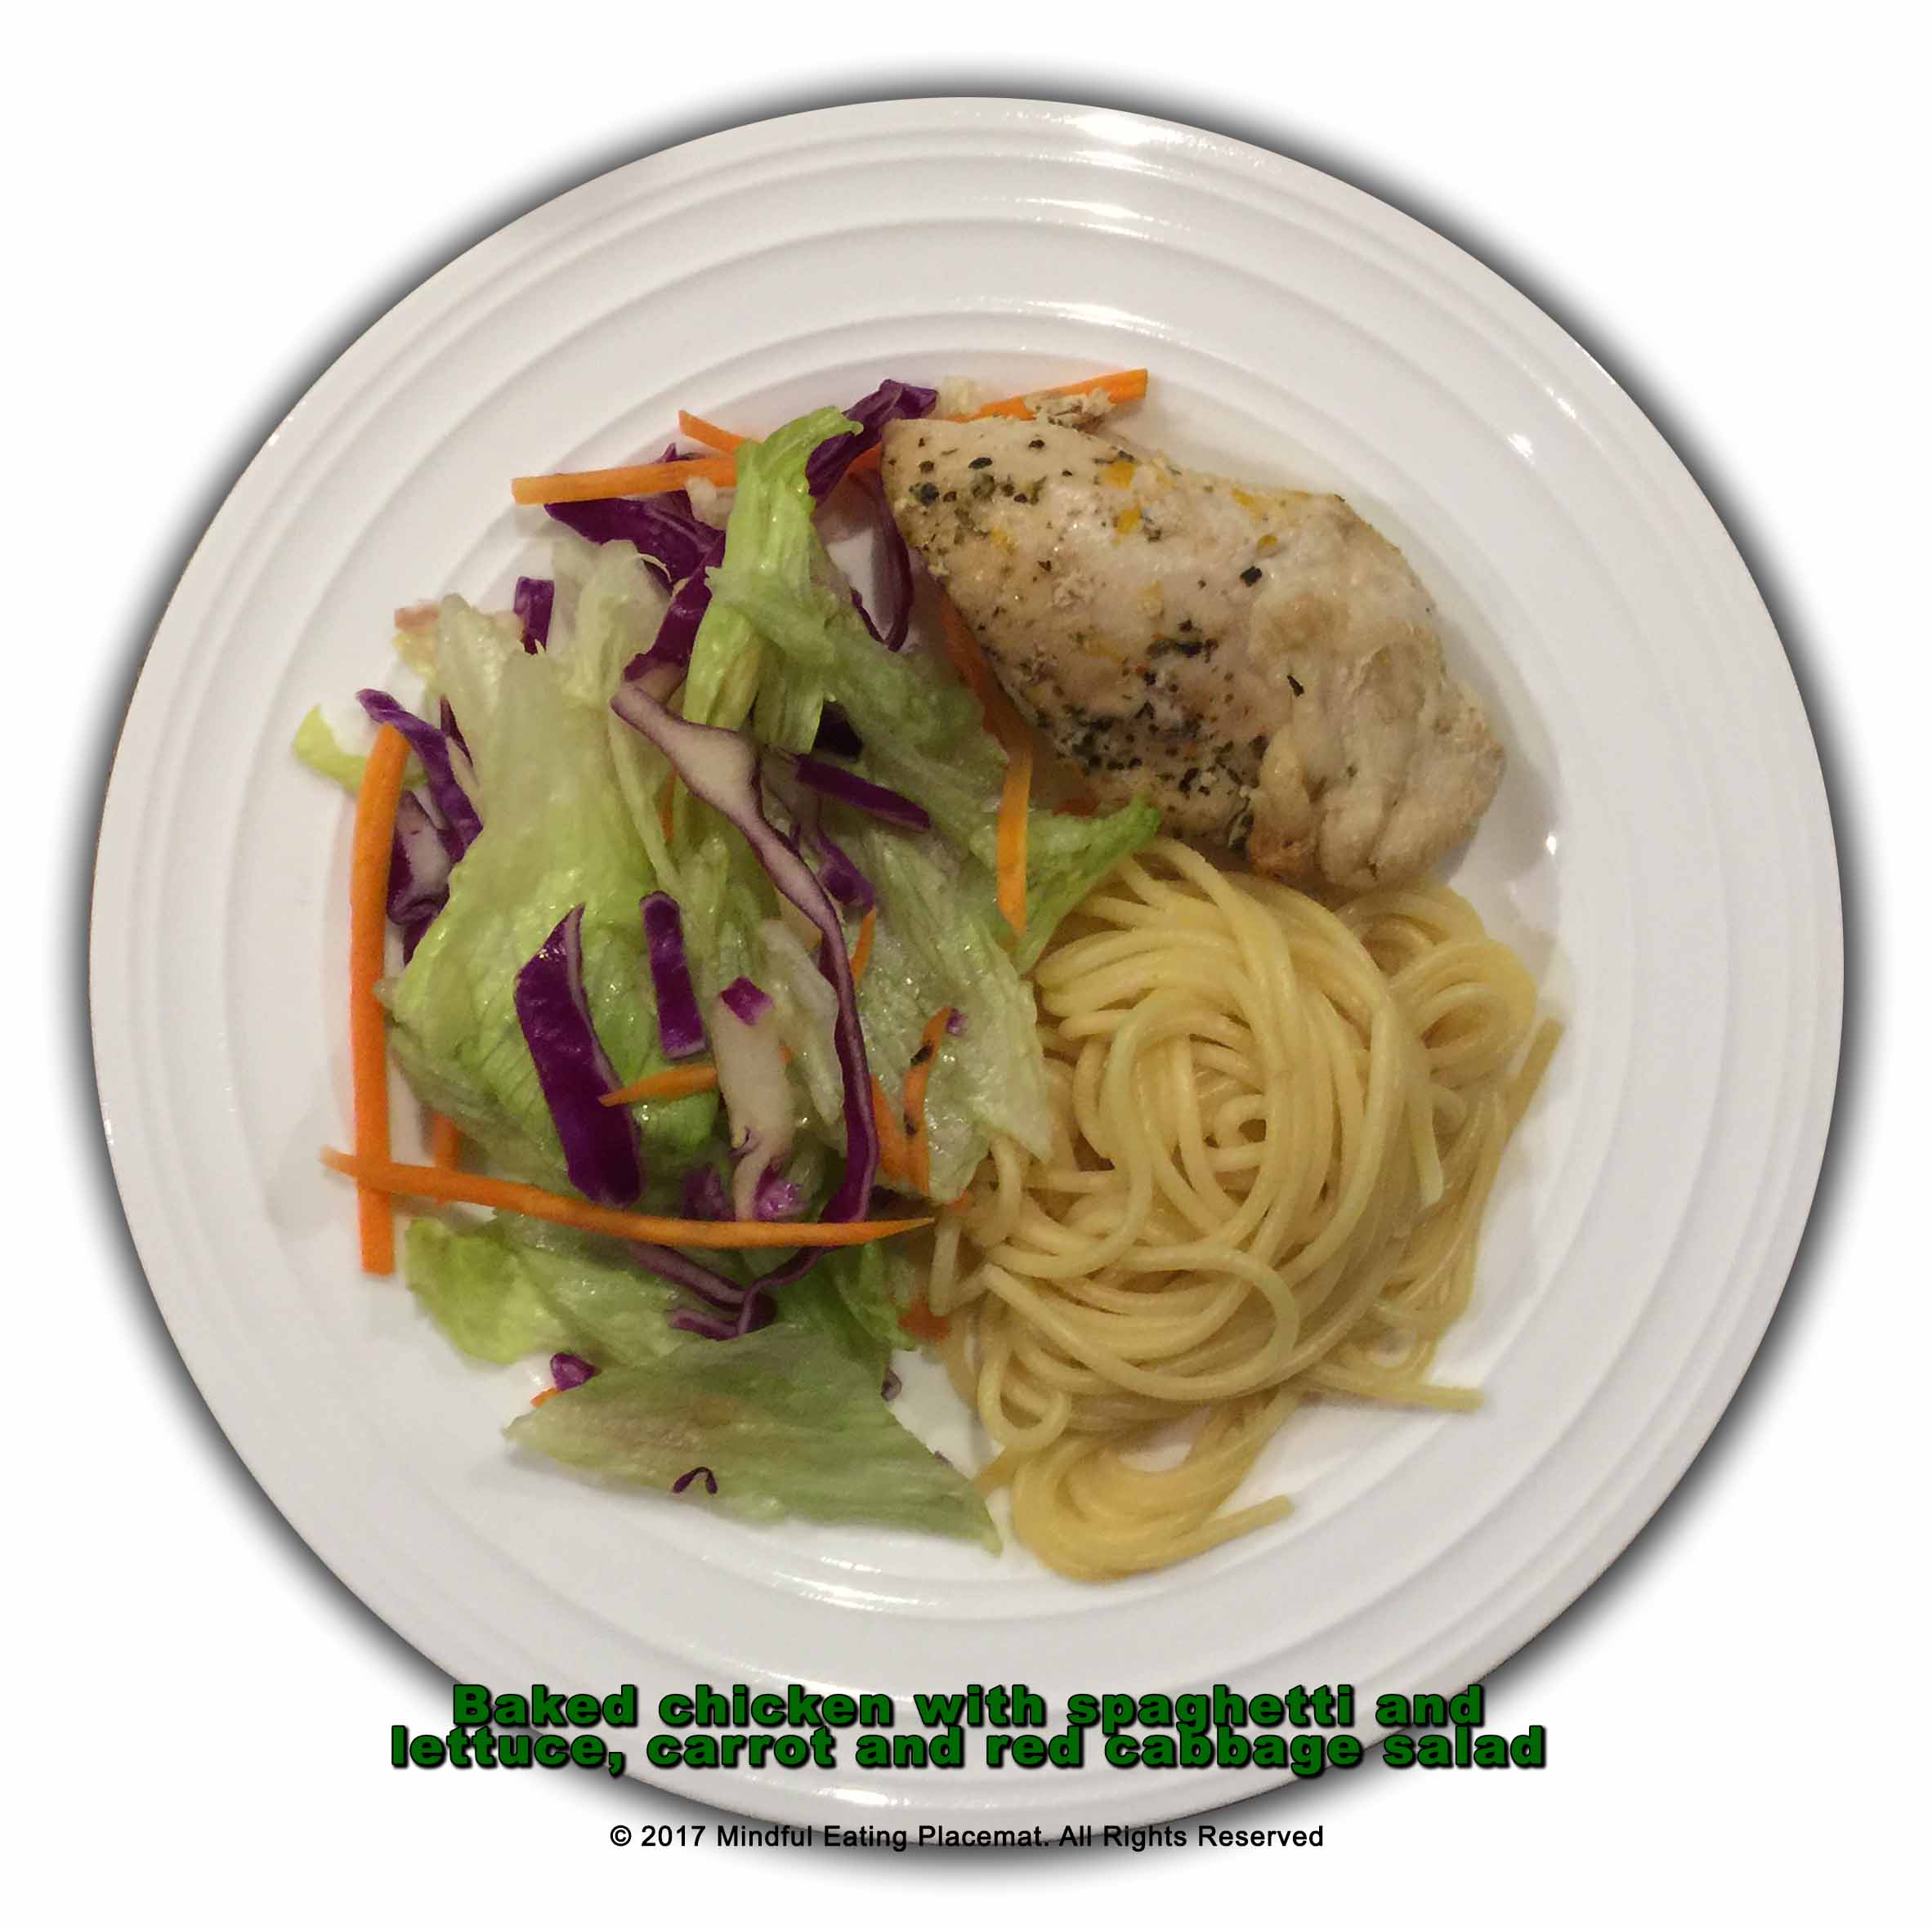 Baked chicken with spaghetti and side salad